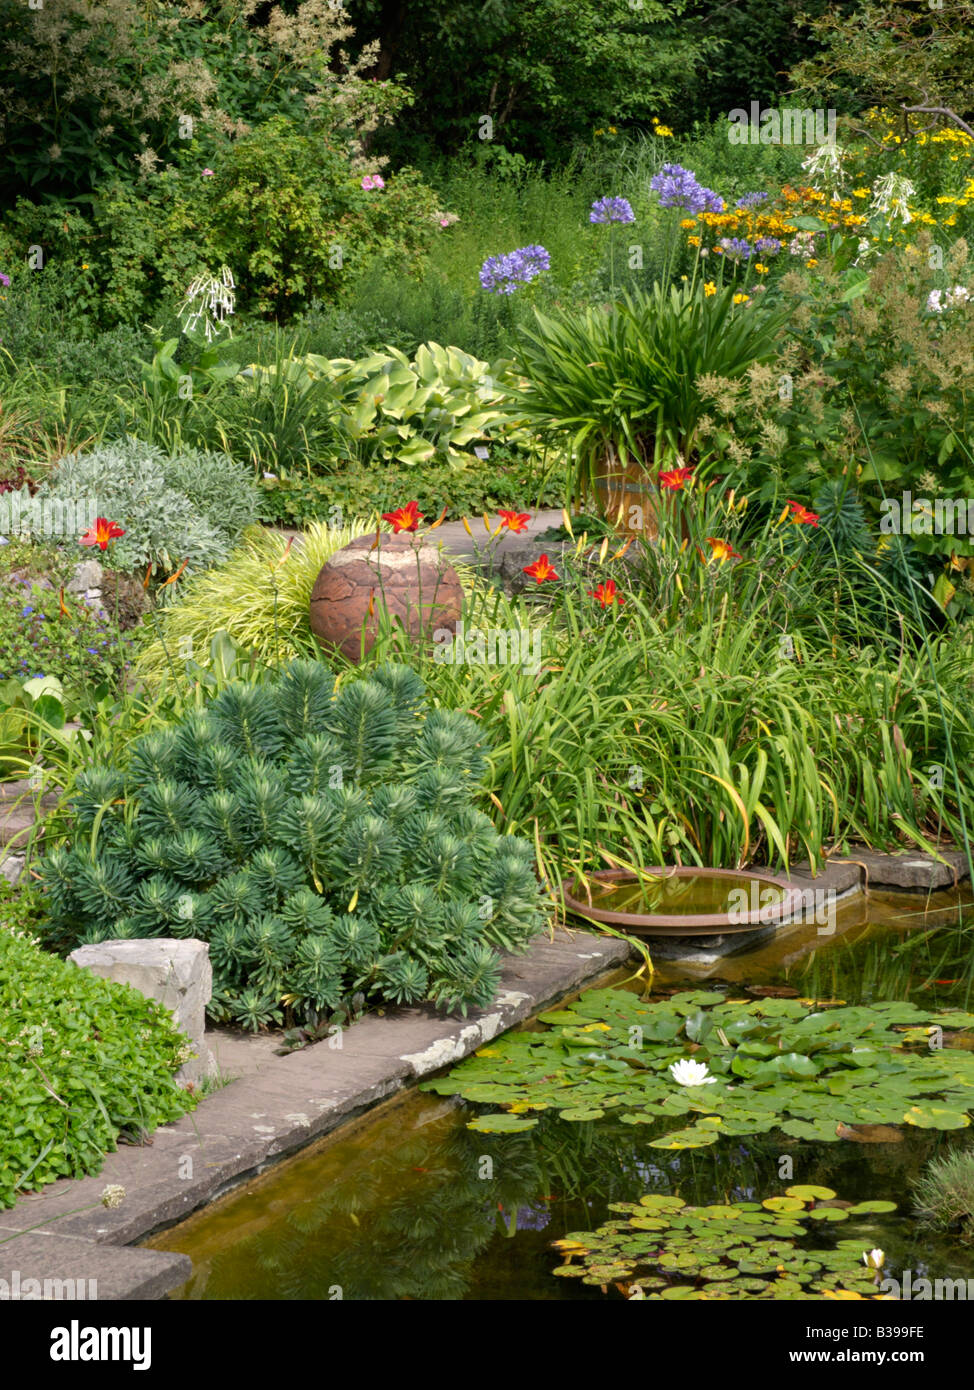 Spurges (Euphorbia), day lilies (Hemerocallis) and African lily (Agapanthus) Stock Photo